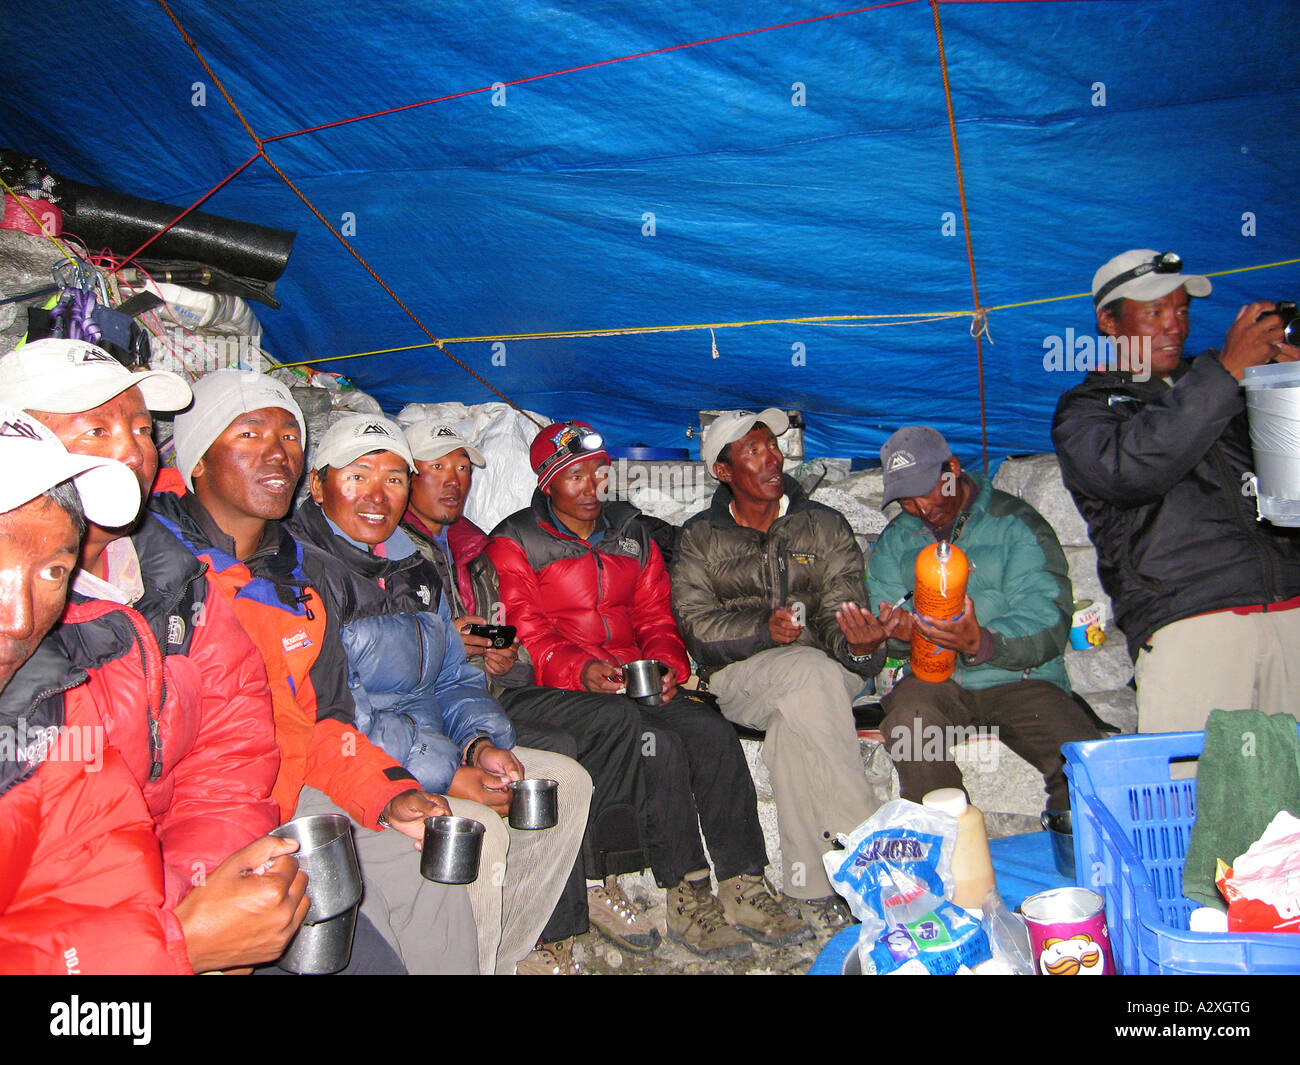 Victory party of the sherpa expedition crew in the Base camp, 5300m, Mount Everest, Himalaya, Nepal Stock Photo